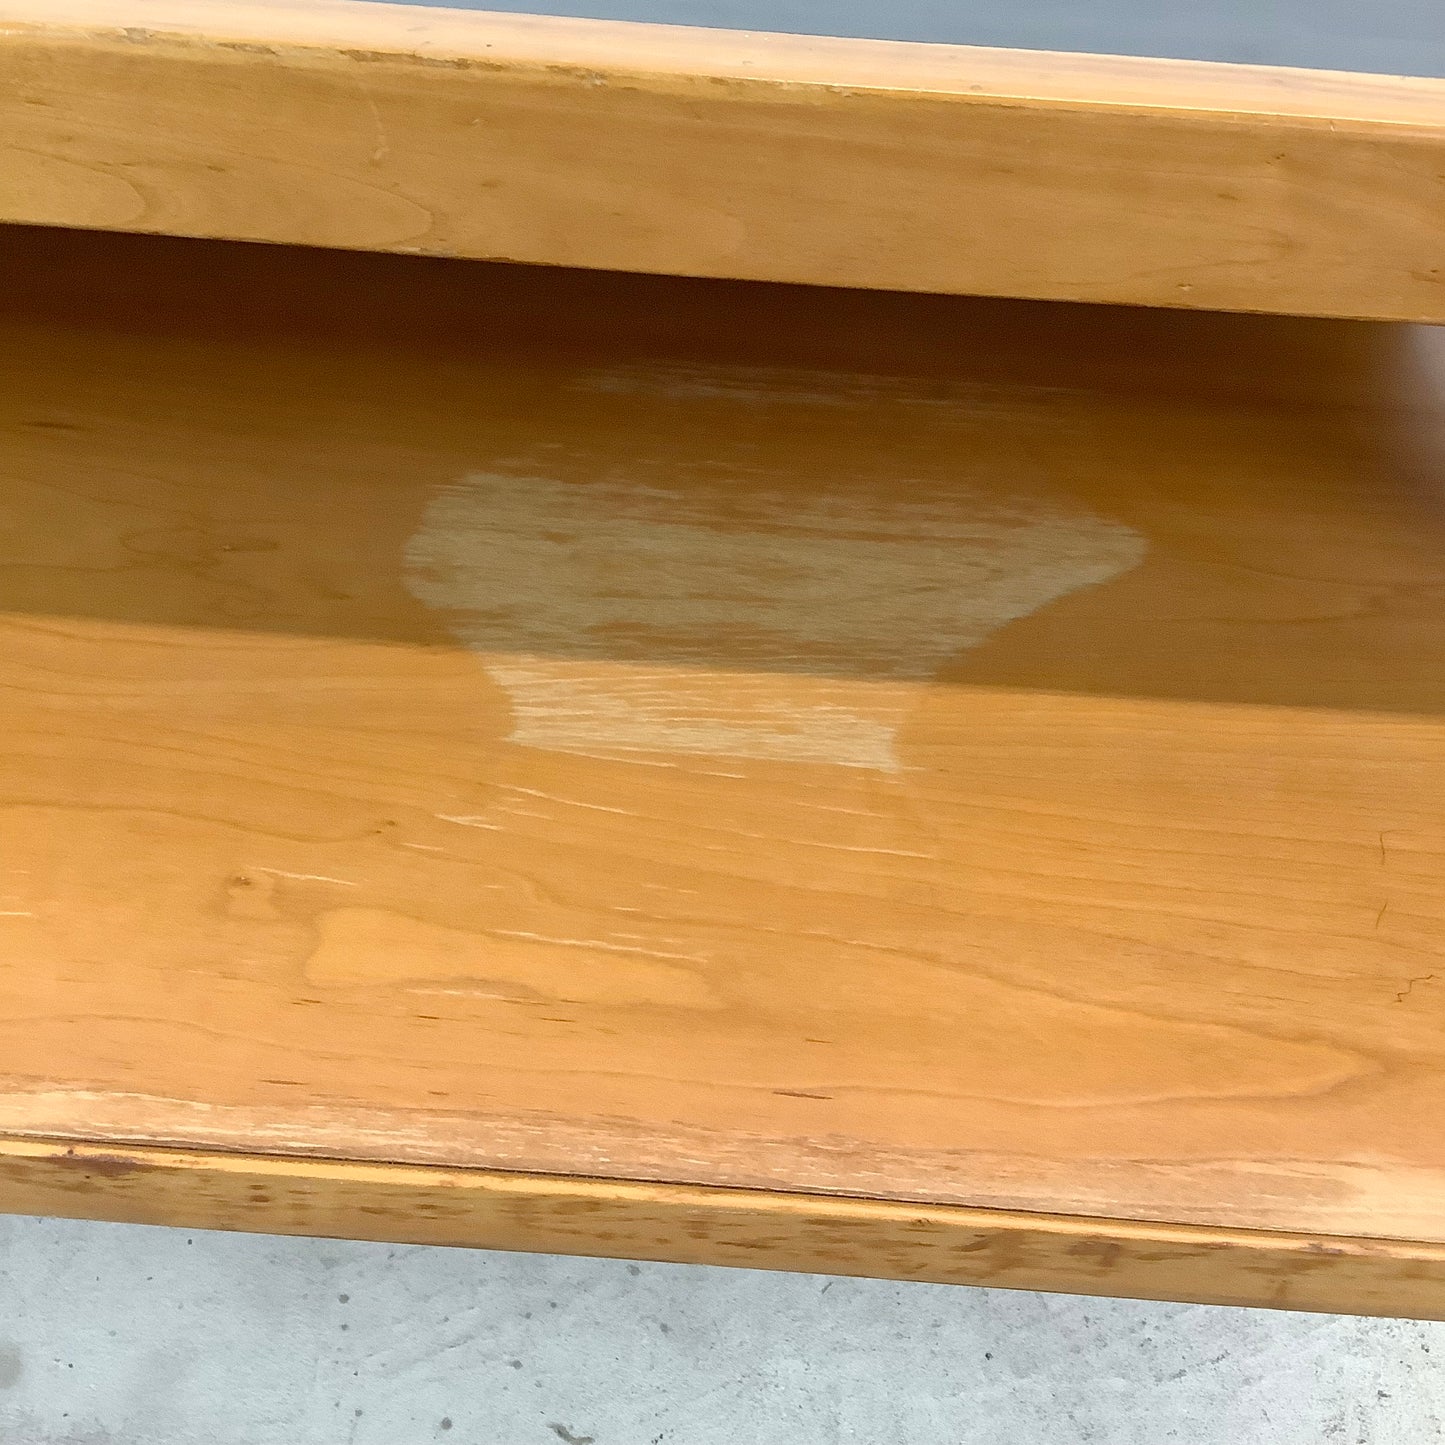 Vintage Modern Coffee Table With Pull Out Shelf